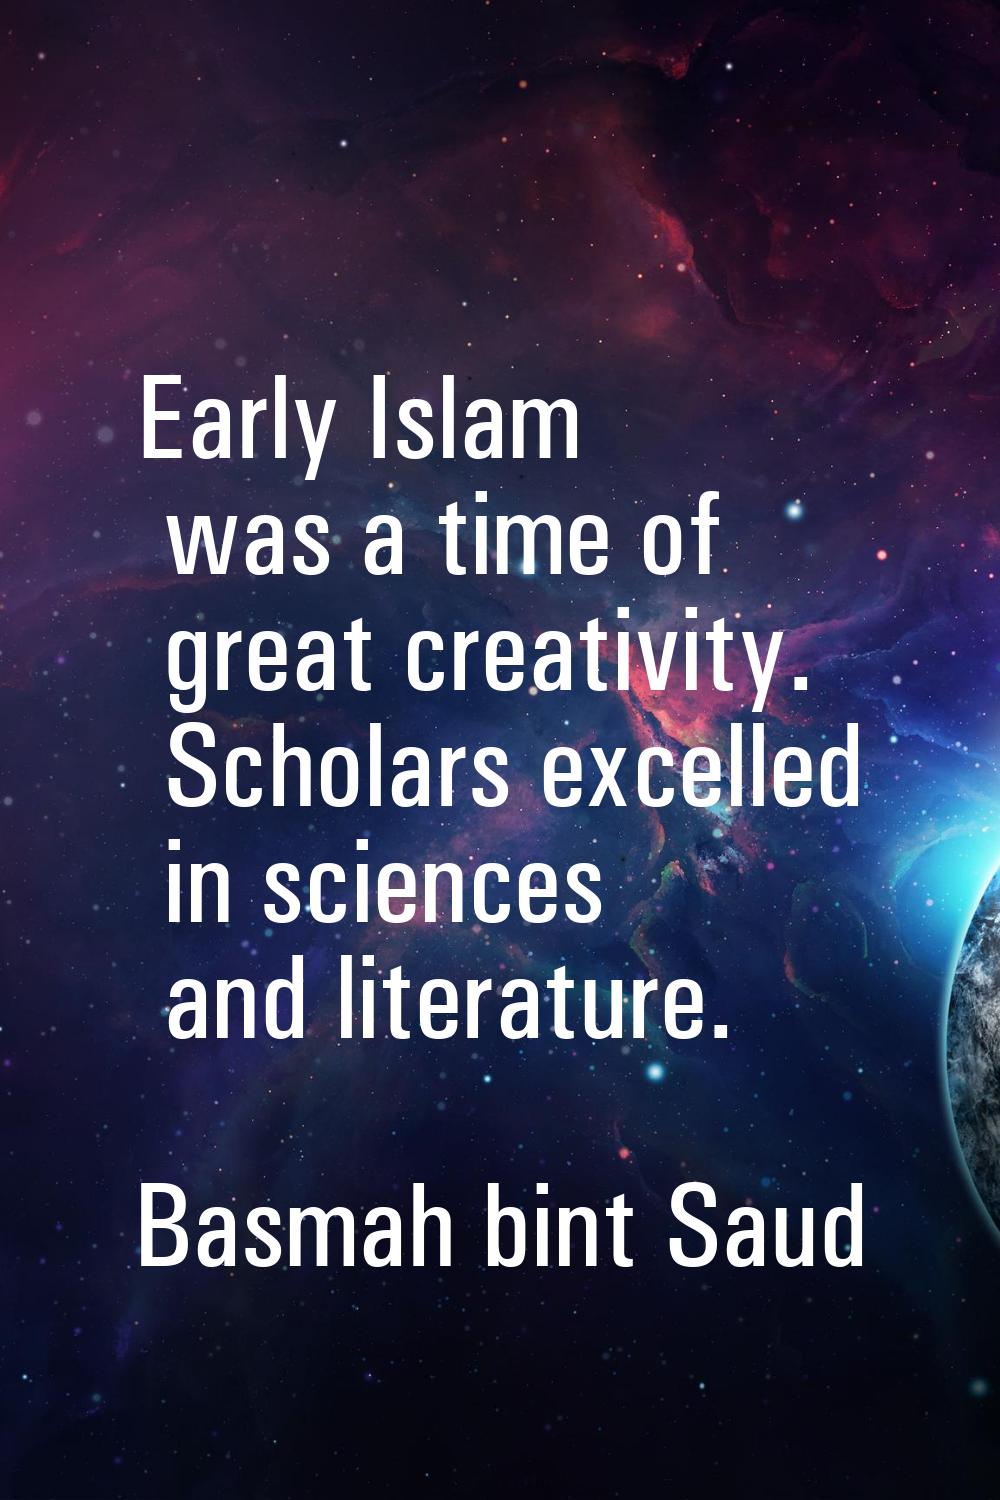 Early Islam was a time of great creativity. Scholars excelled in sciences and literature.